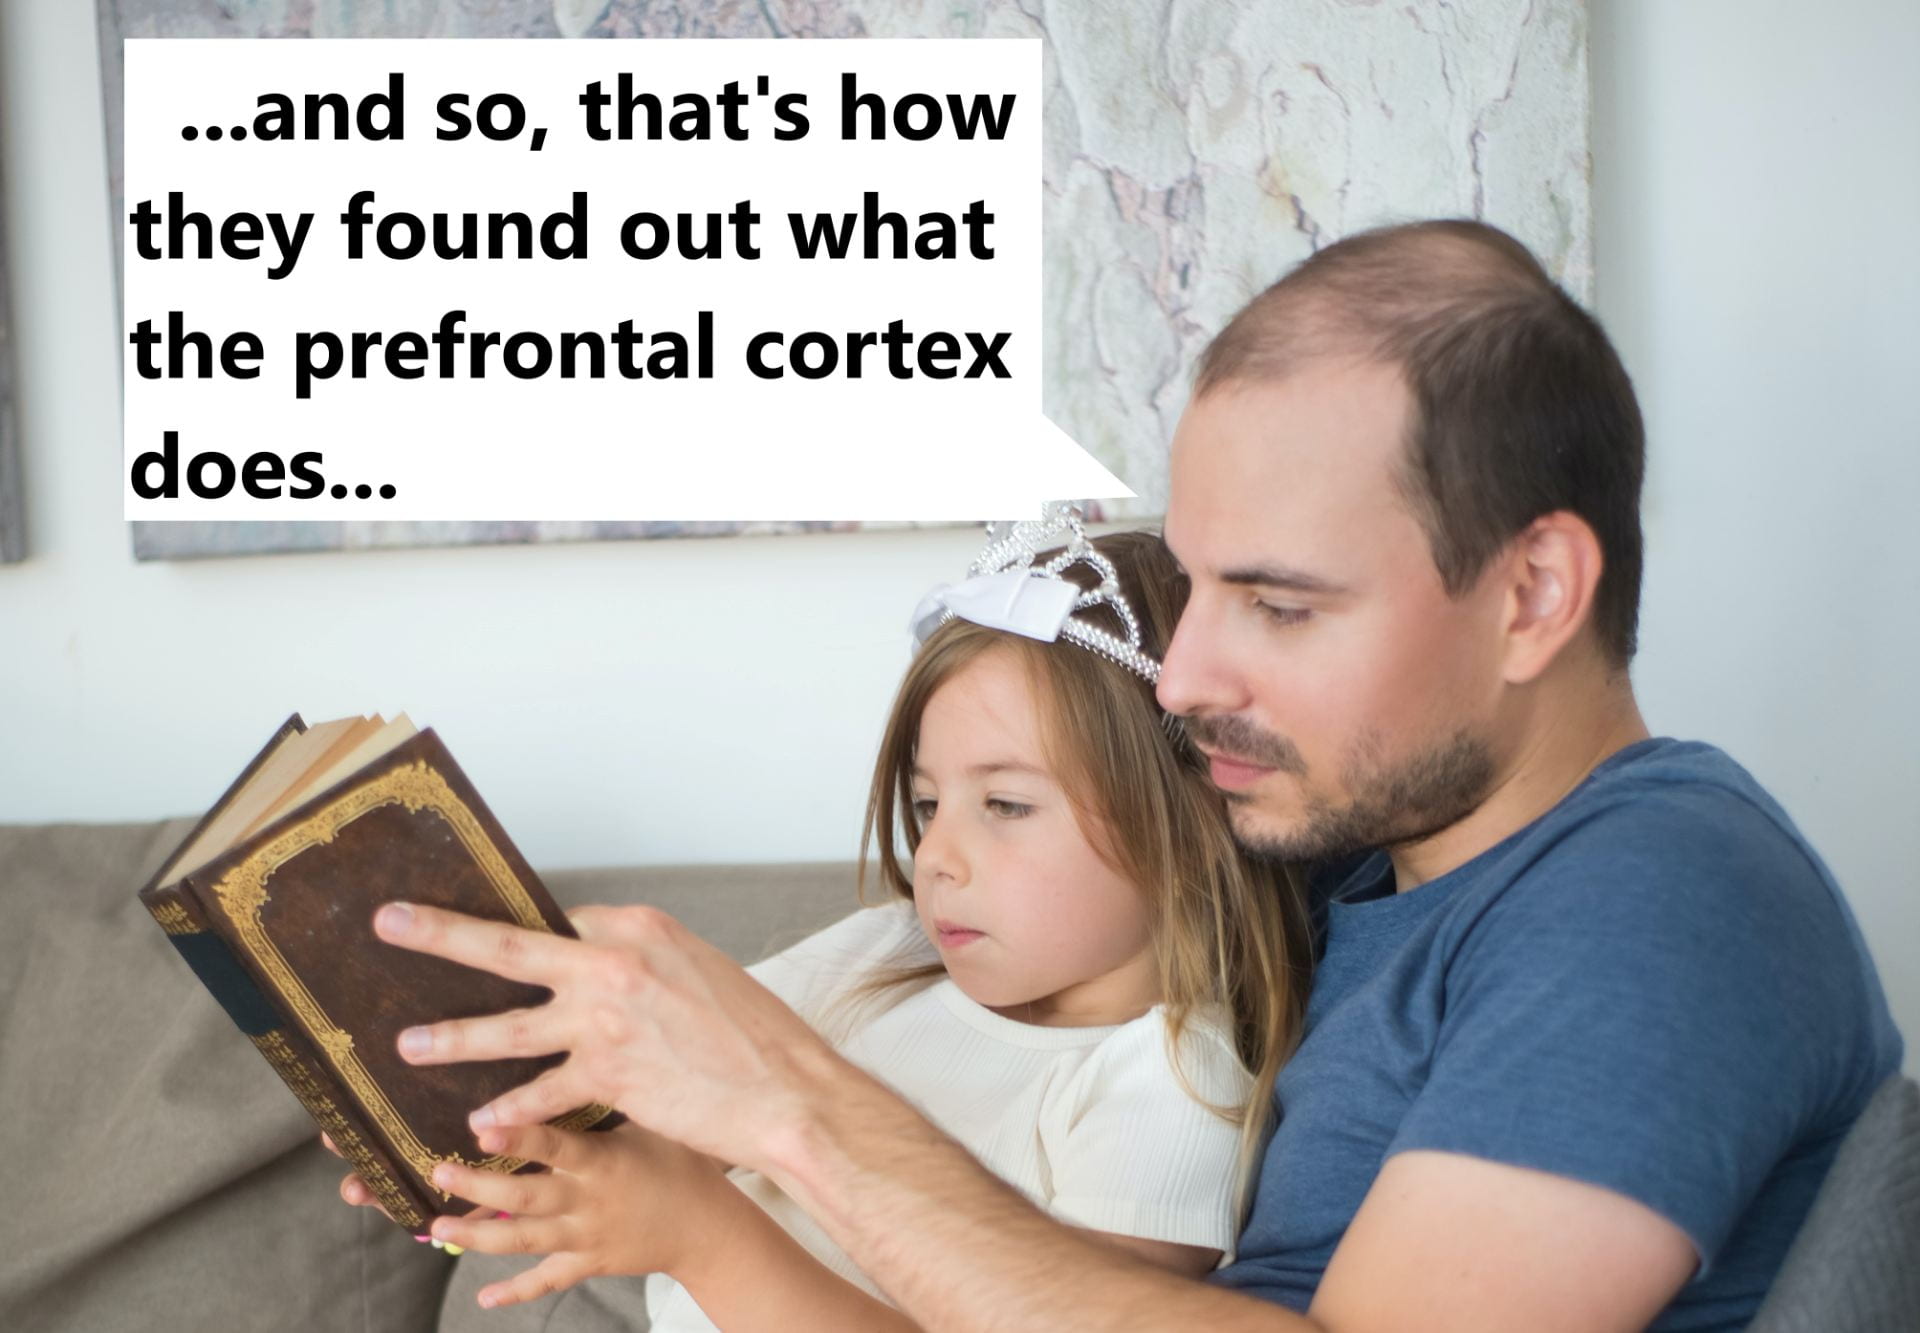  A father, reading a book with his daughter on the couch, is saying ‘...and so, that’s how they found out what the prefrontal cortex does…’